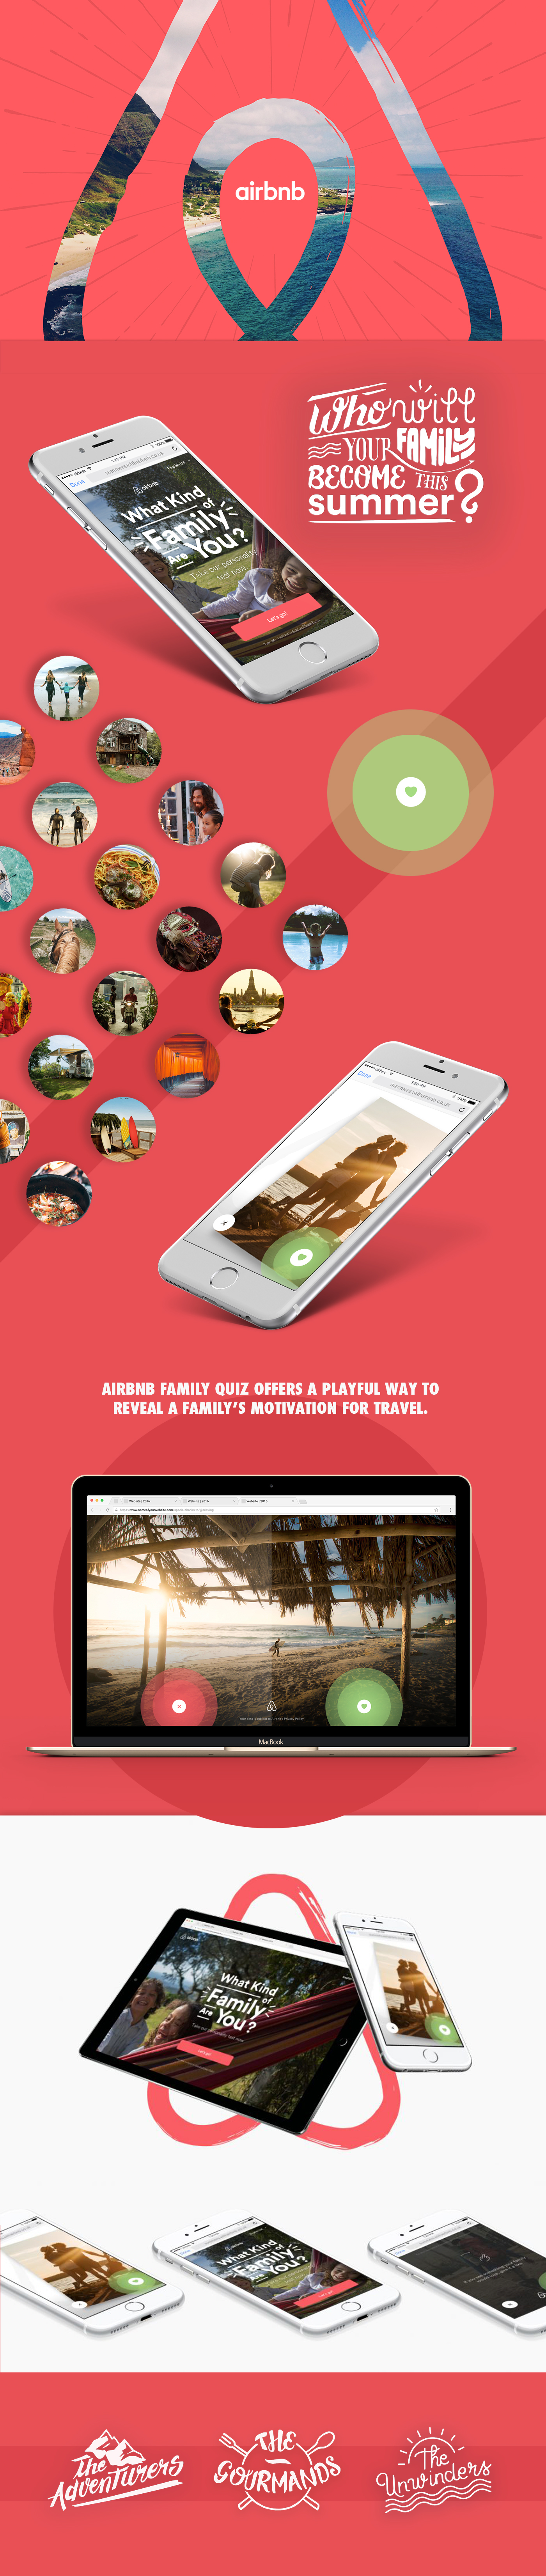 webiste airbnb interactive Travel SWIPE html5 photos trips family facebook